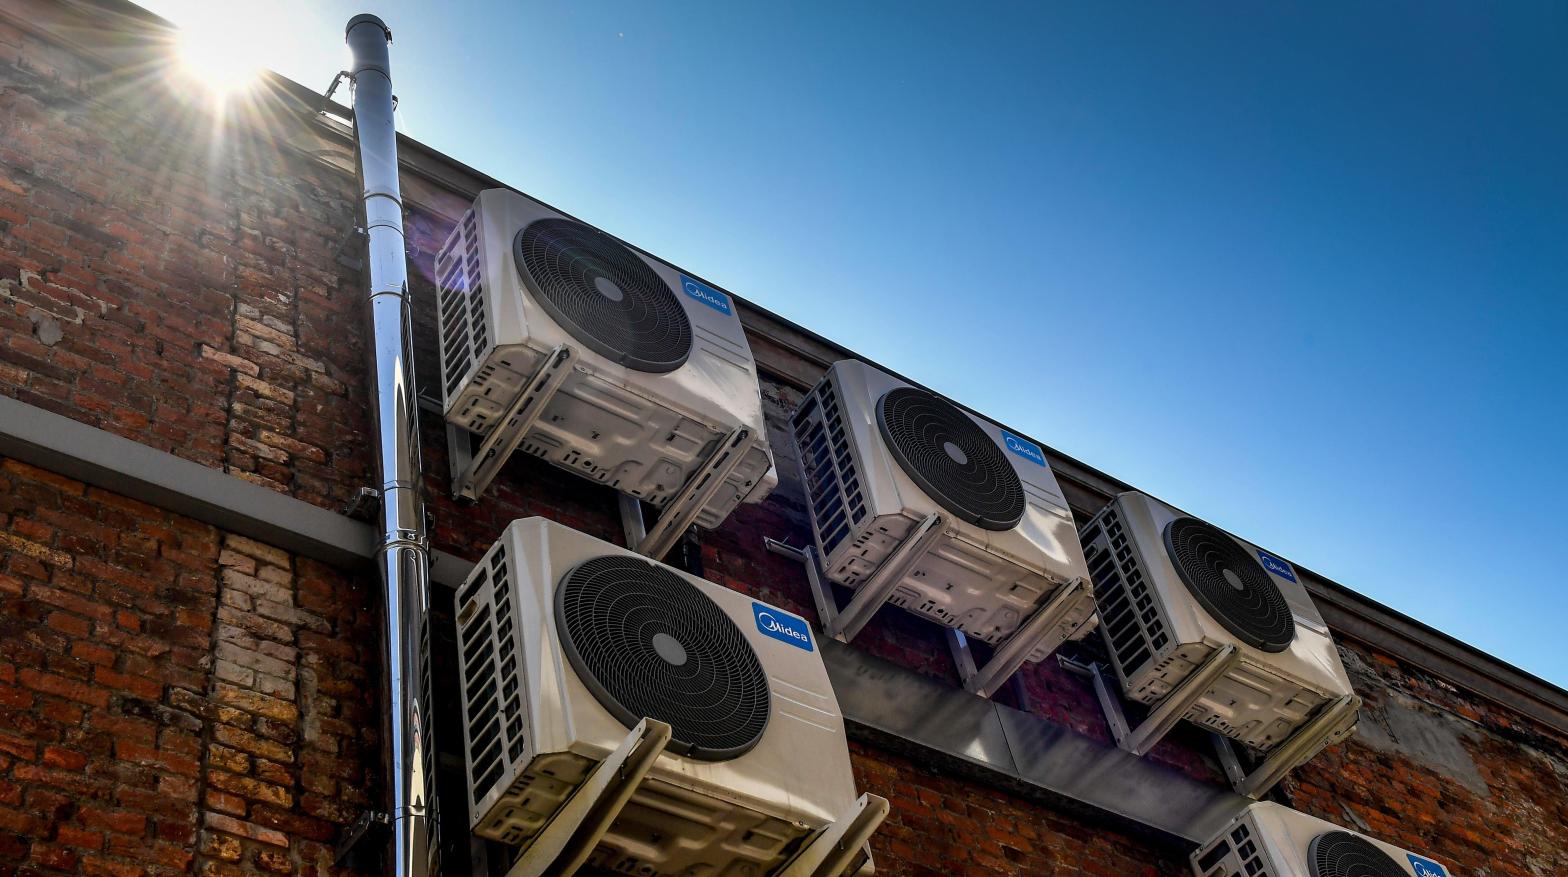 Modern air conditioners typically emit greenhouse gases and are energy intensive. (Image: Dirk Waem, Getty Images)